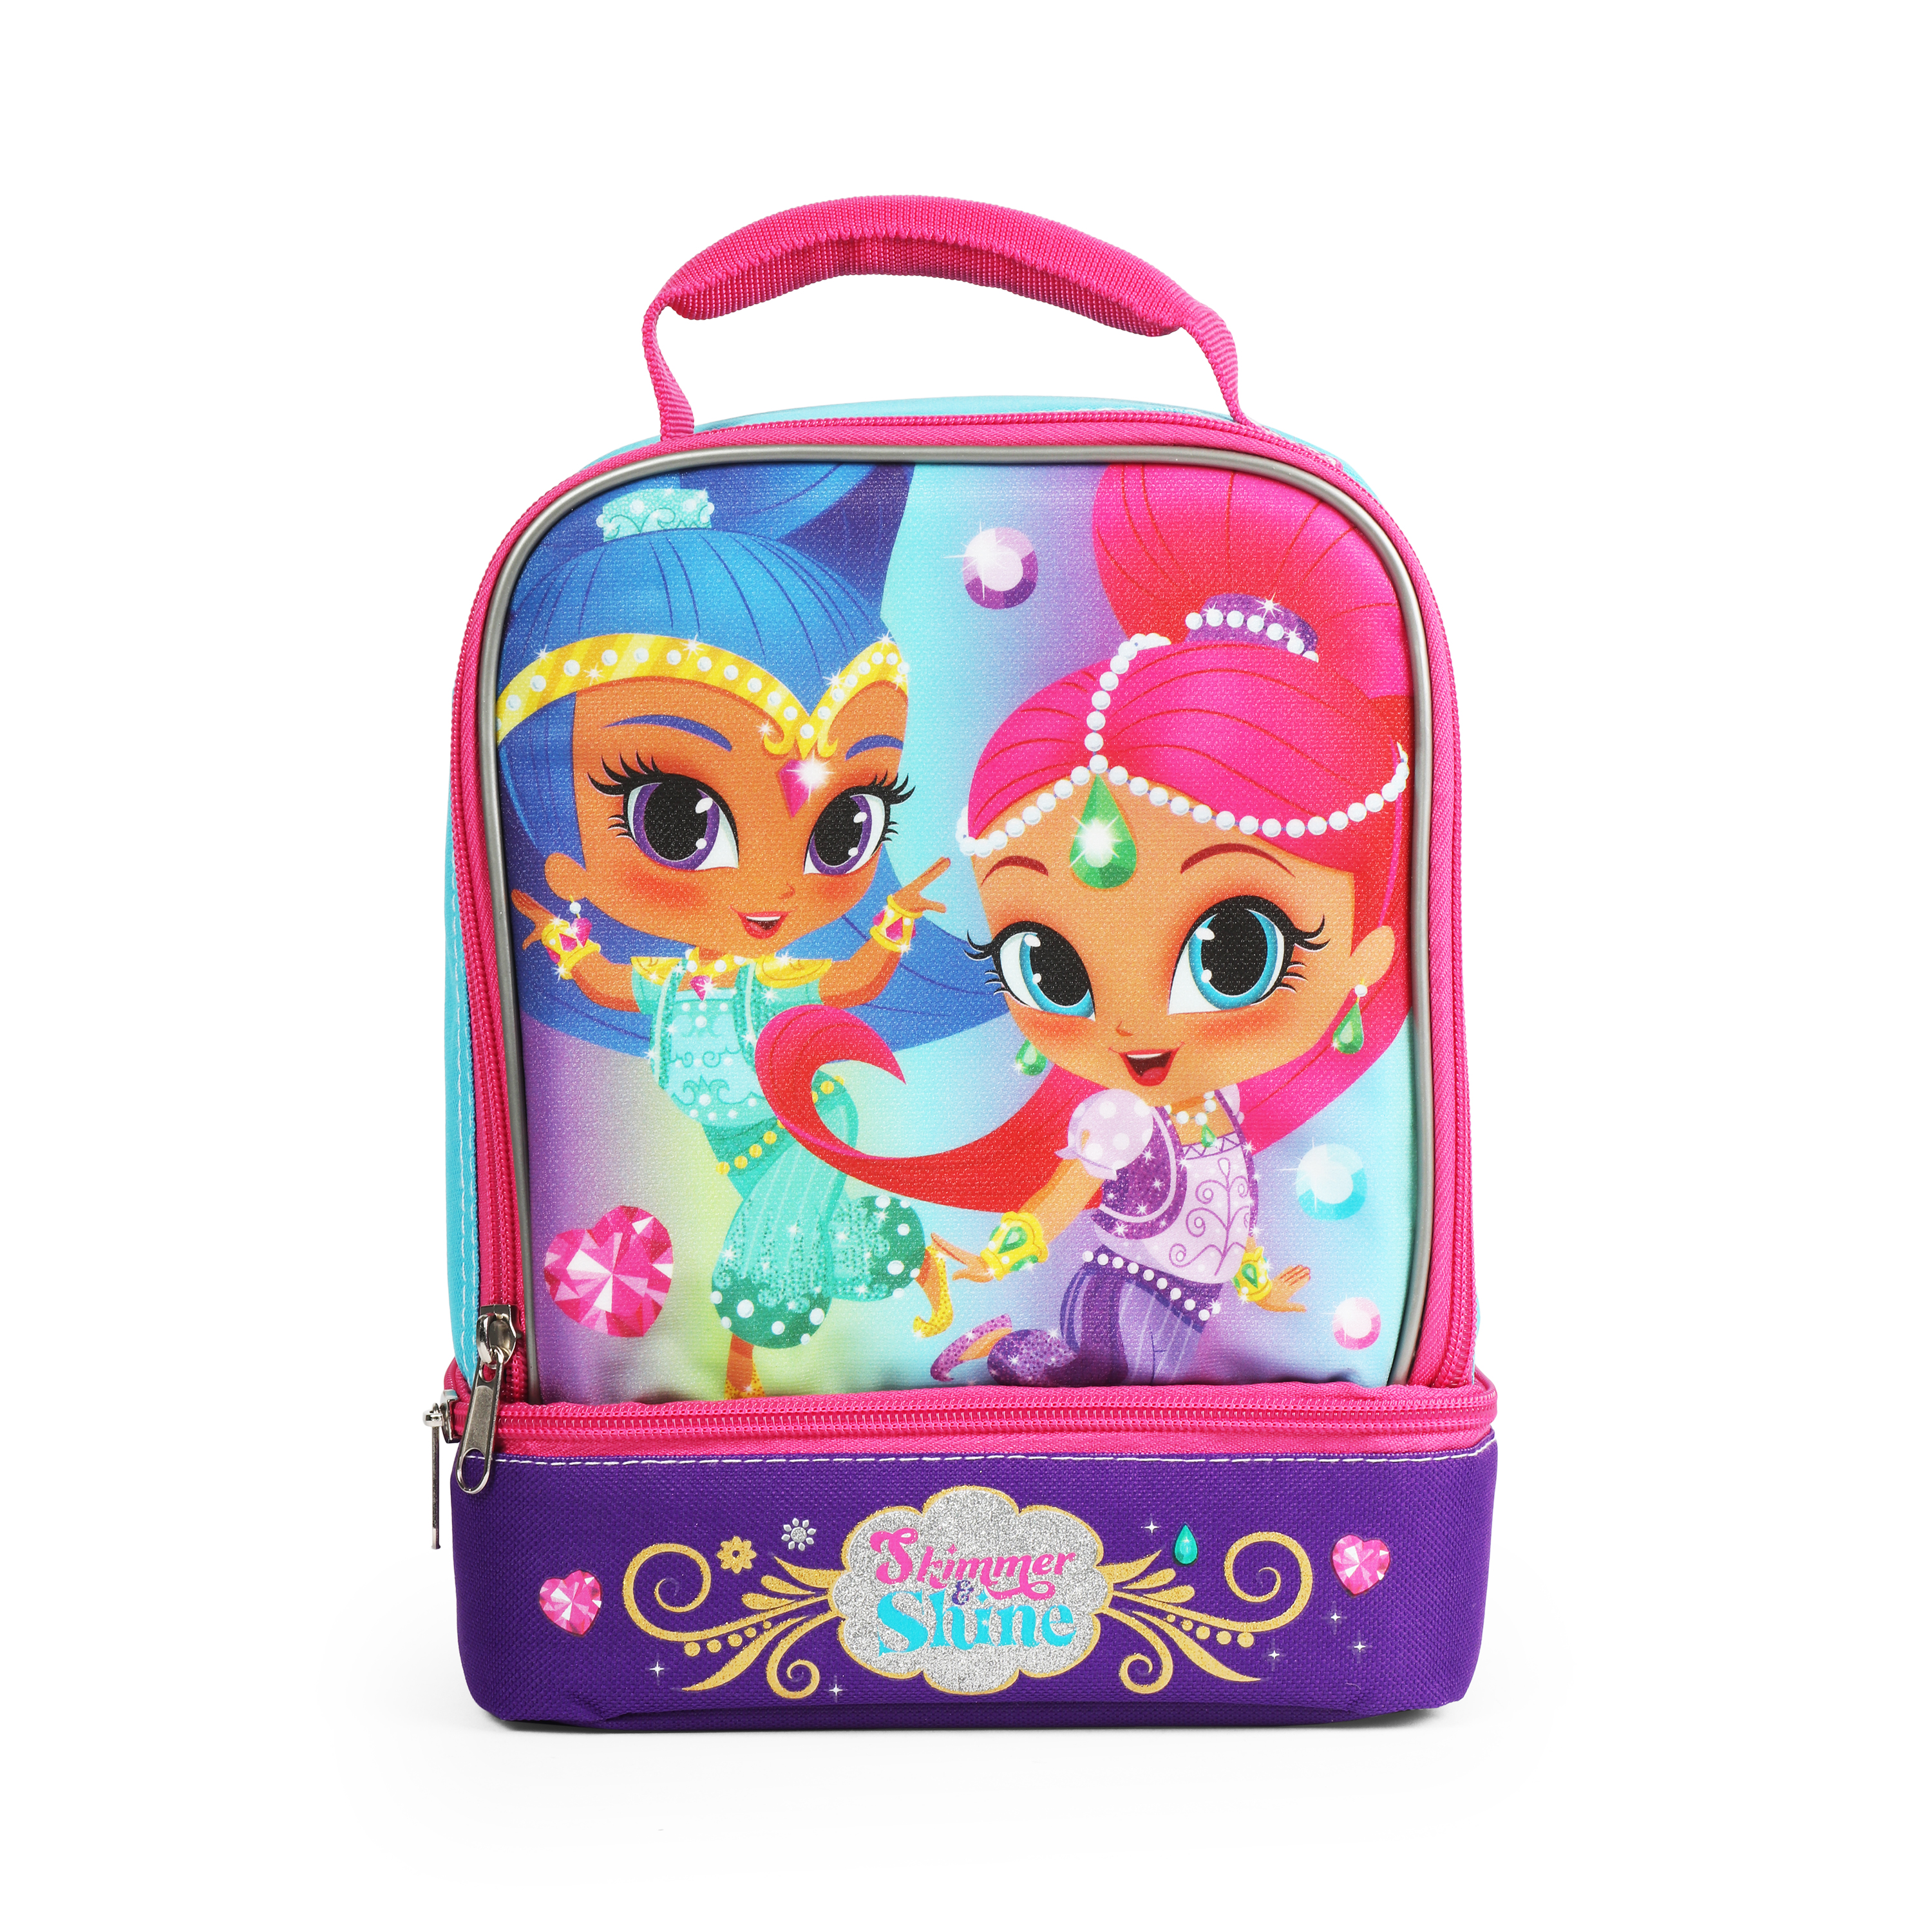 Nickelodeon Shimmer and Shine Insulated Dual-Compartment Lunch Tote